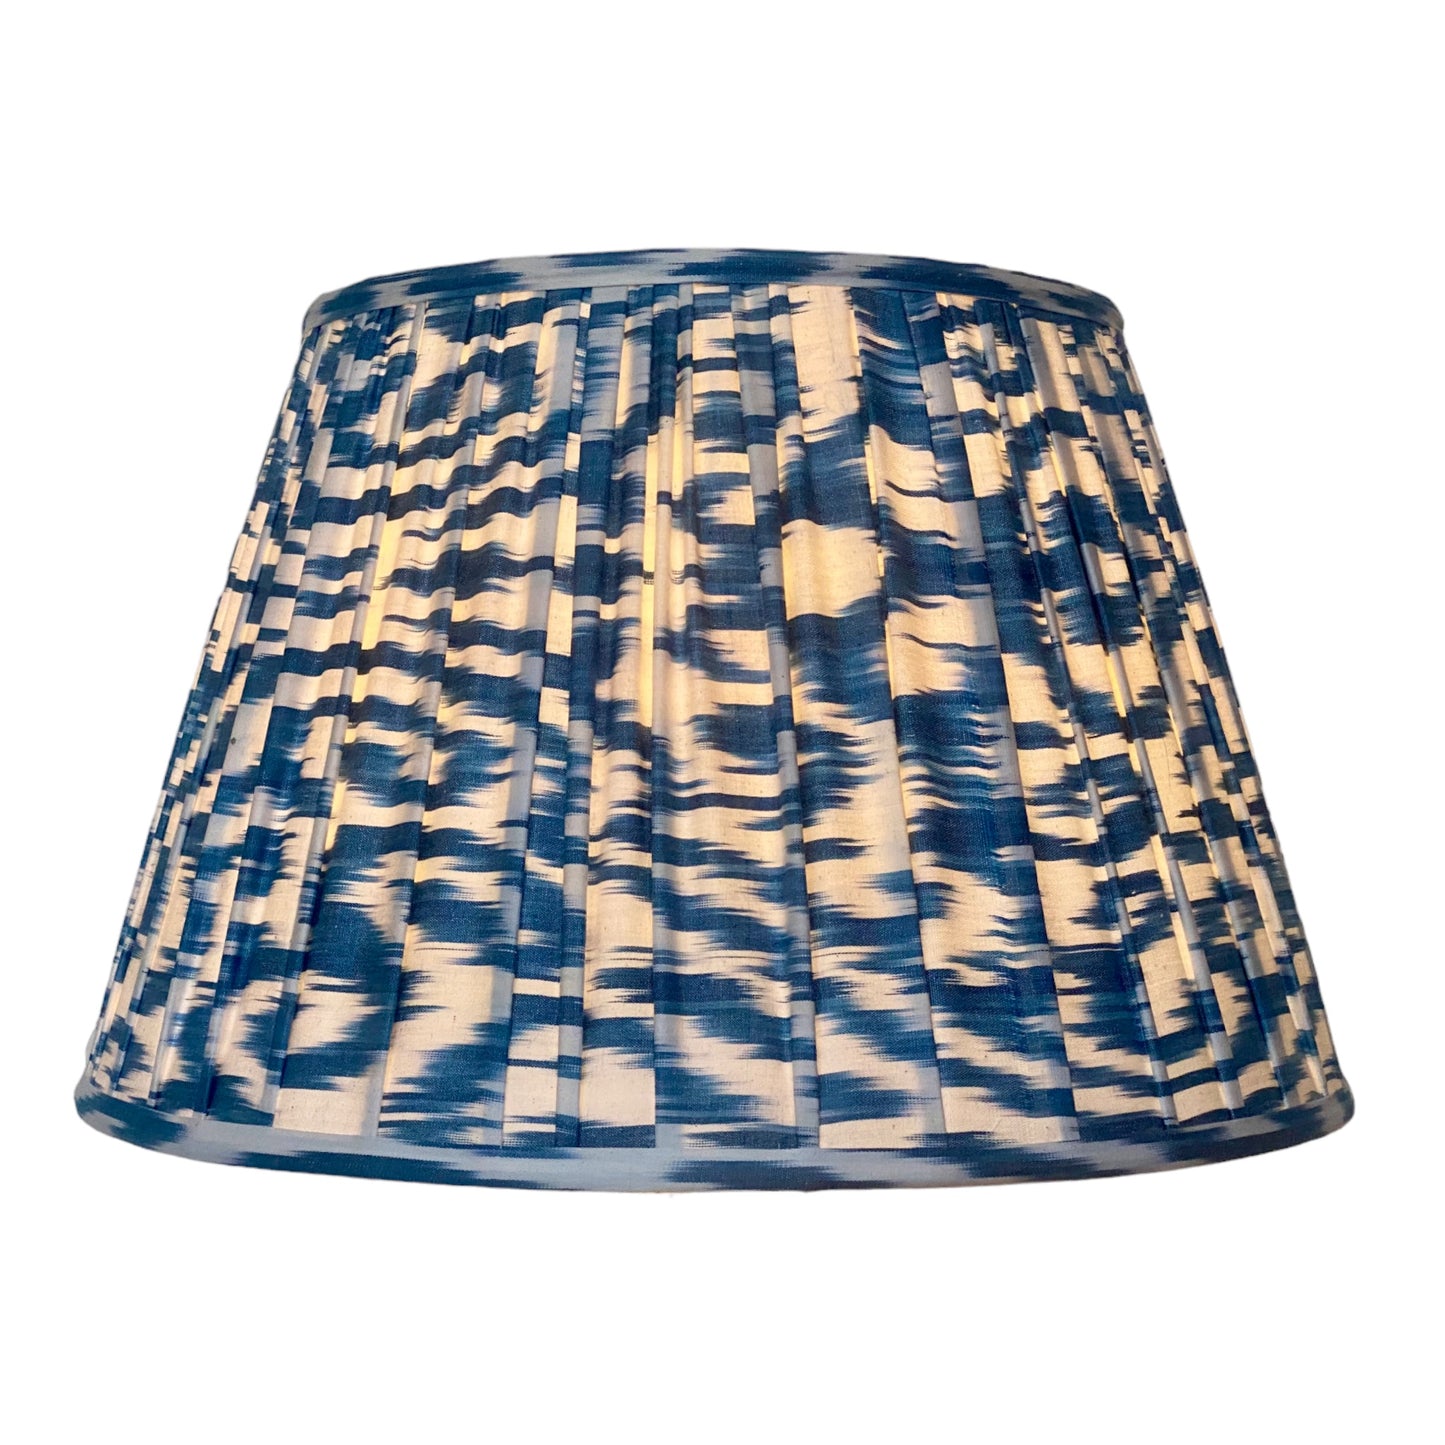 Blue and white ikat lampshade lit